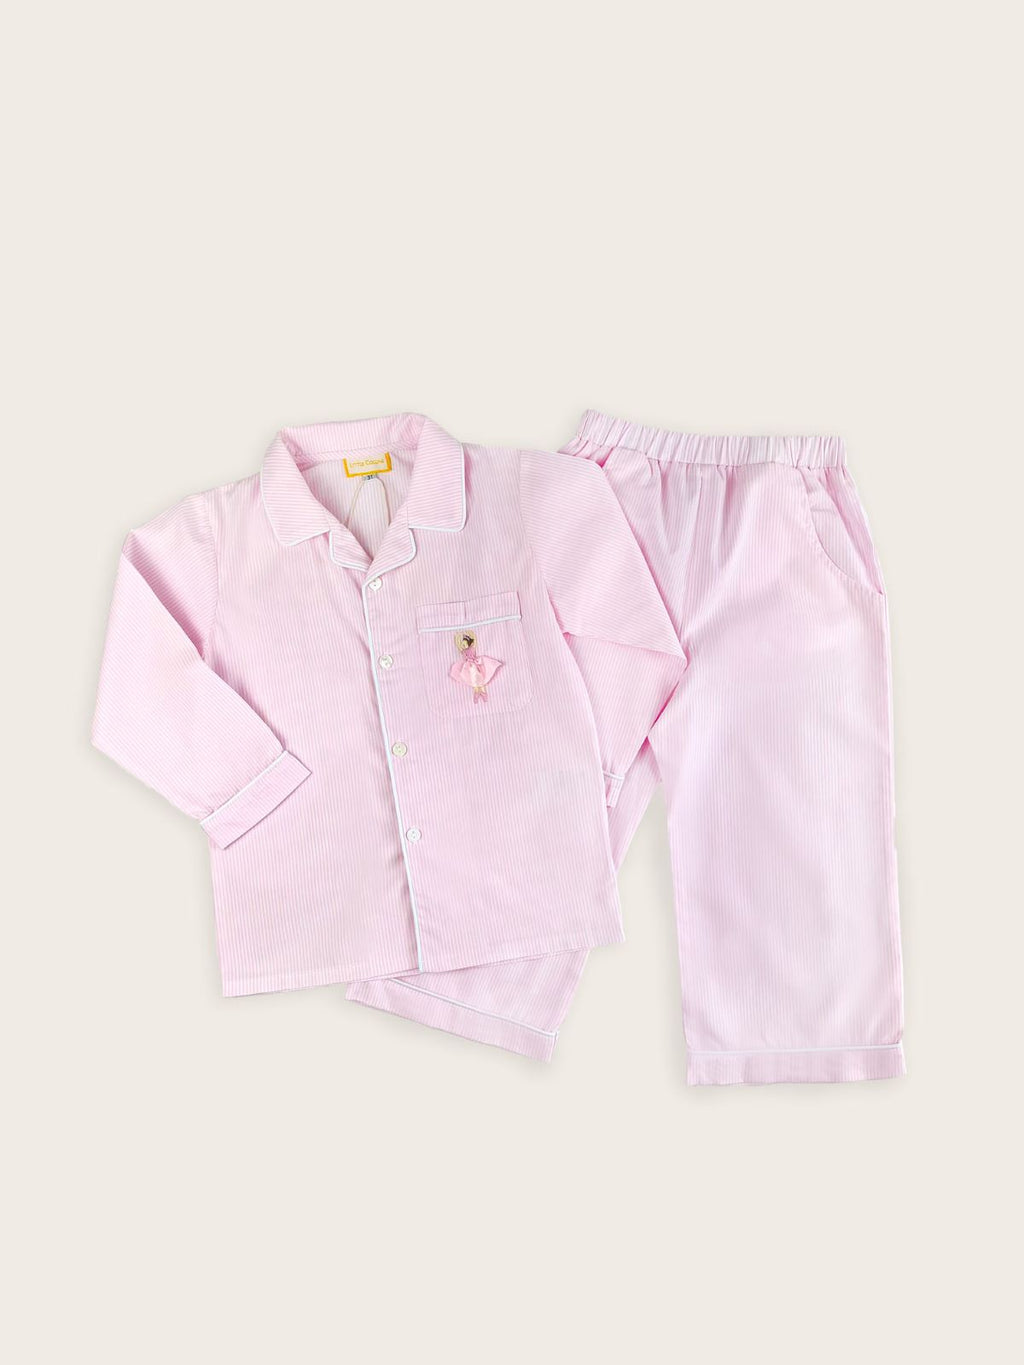 Pink and white striped long sleeve pyjamas with a ballerina embroidered onto the front pocket.